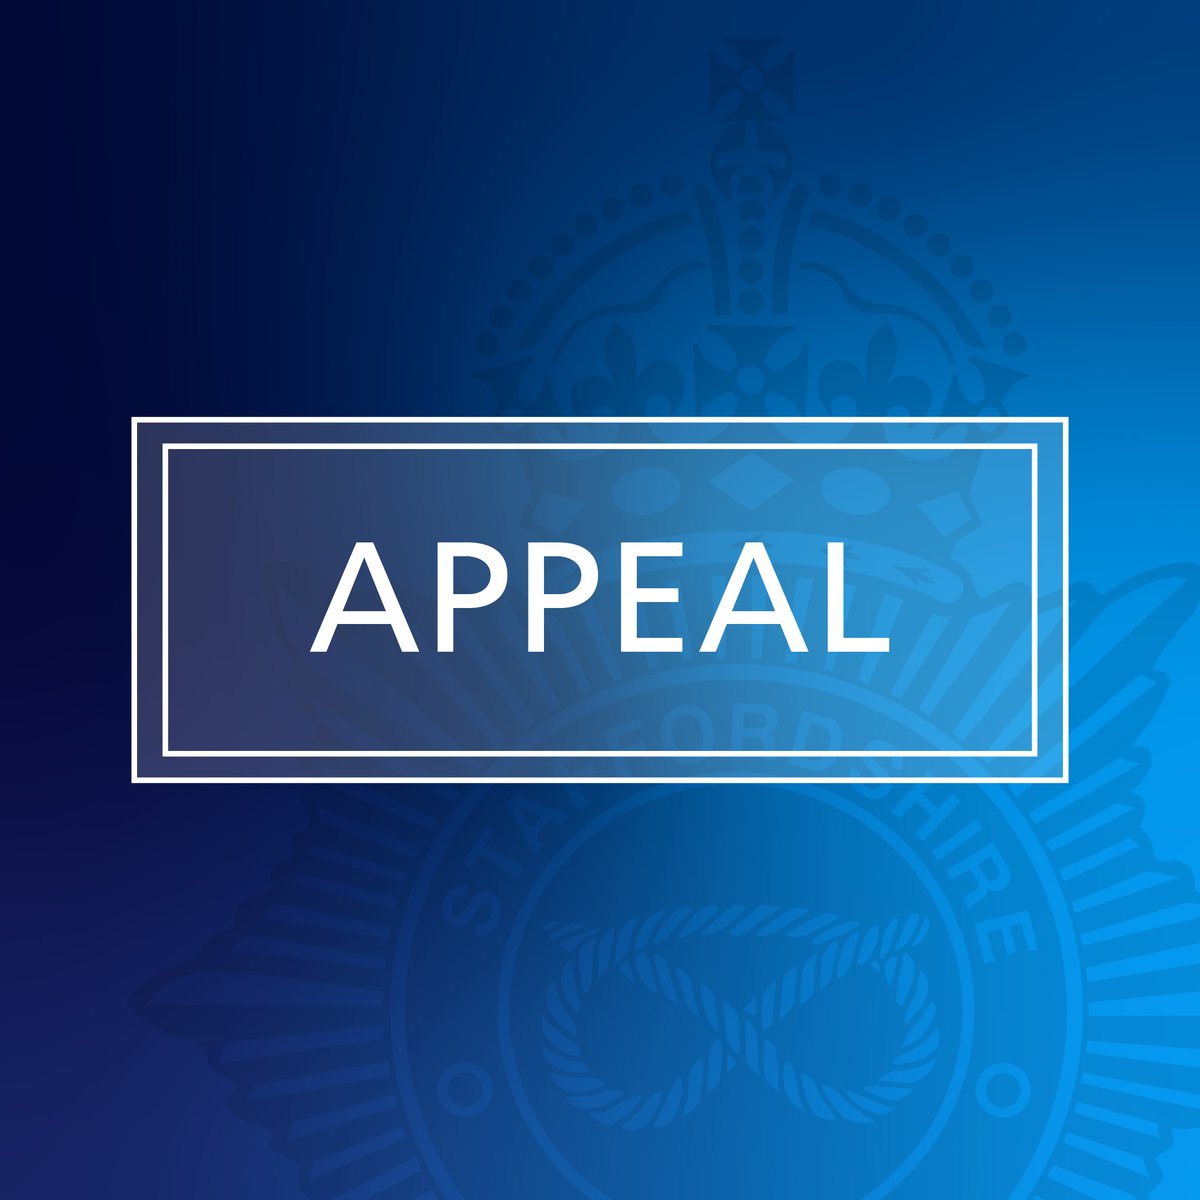 #APPEAL We are appealing for witnesses to a serious assault at the Atik nightclub in Tamworth in the early hours of this morning. If you know anything, please get in touch. orlo.uk/CjjQy